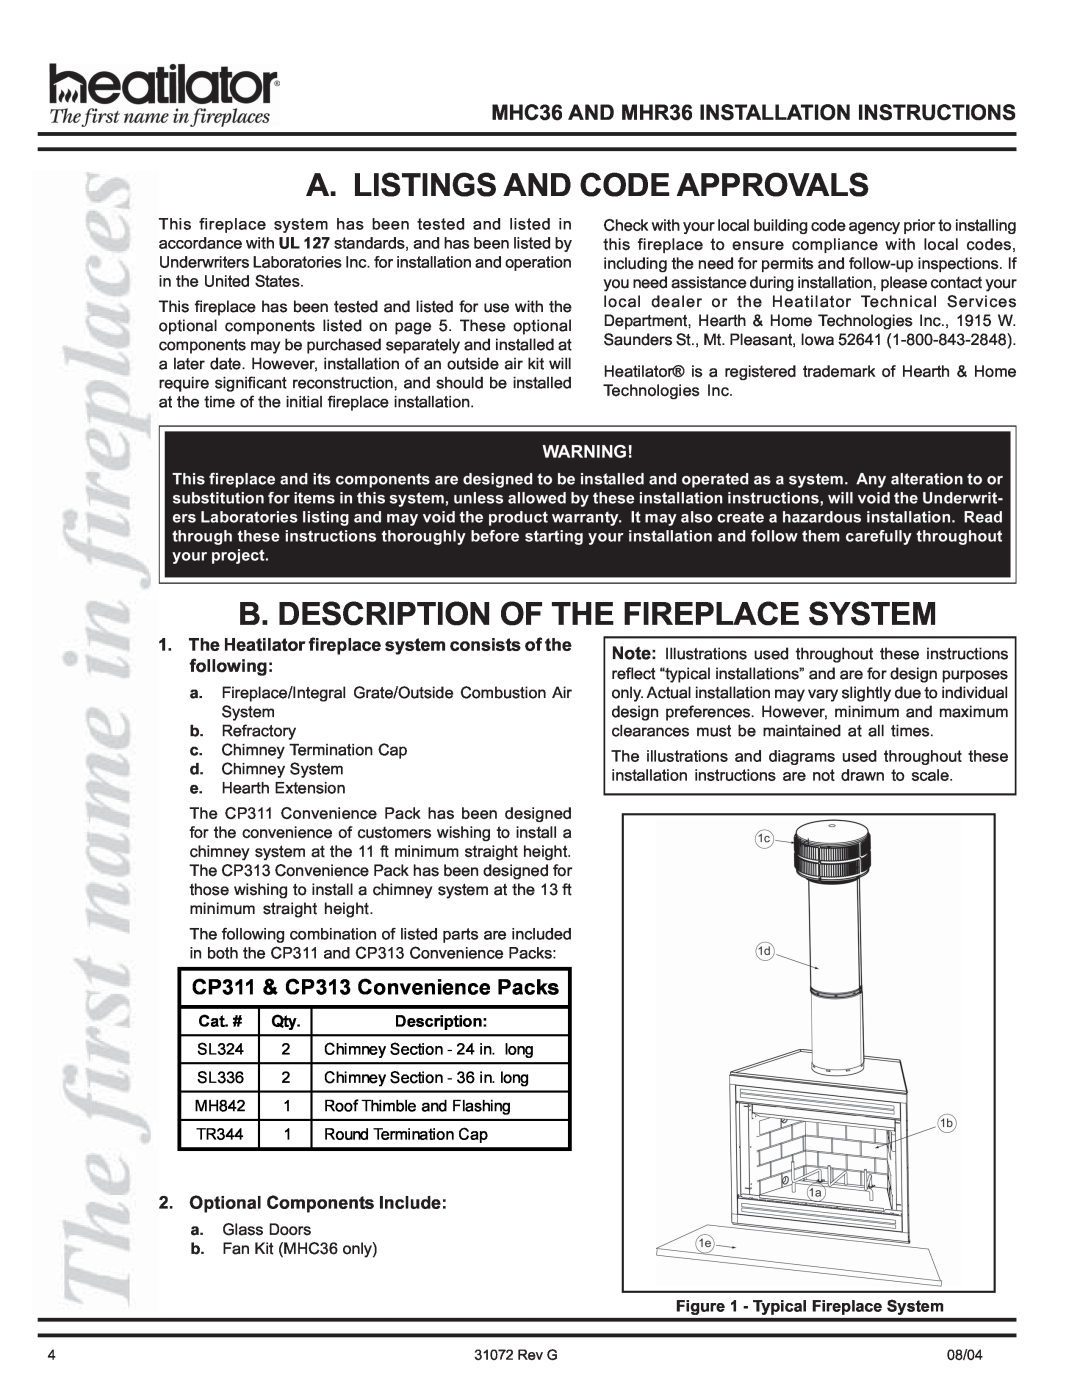 Heart & Home Collectables MHC36, MHR36 manual A. Listings And Code Approvals, B. Description Of The Fireplace System 